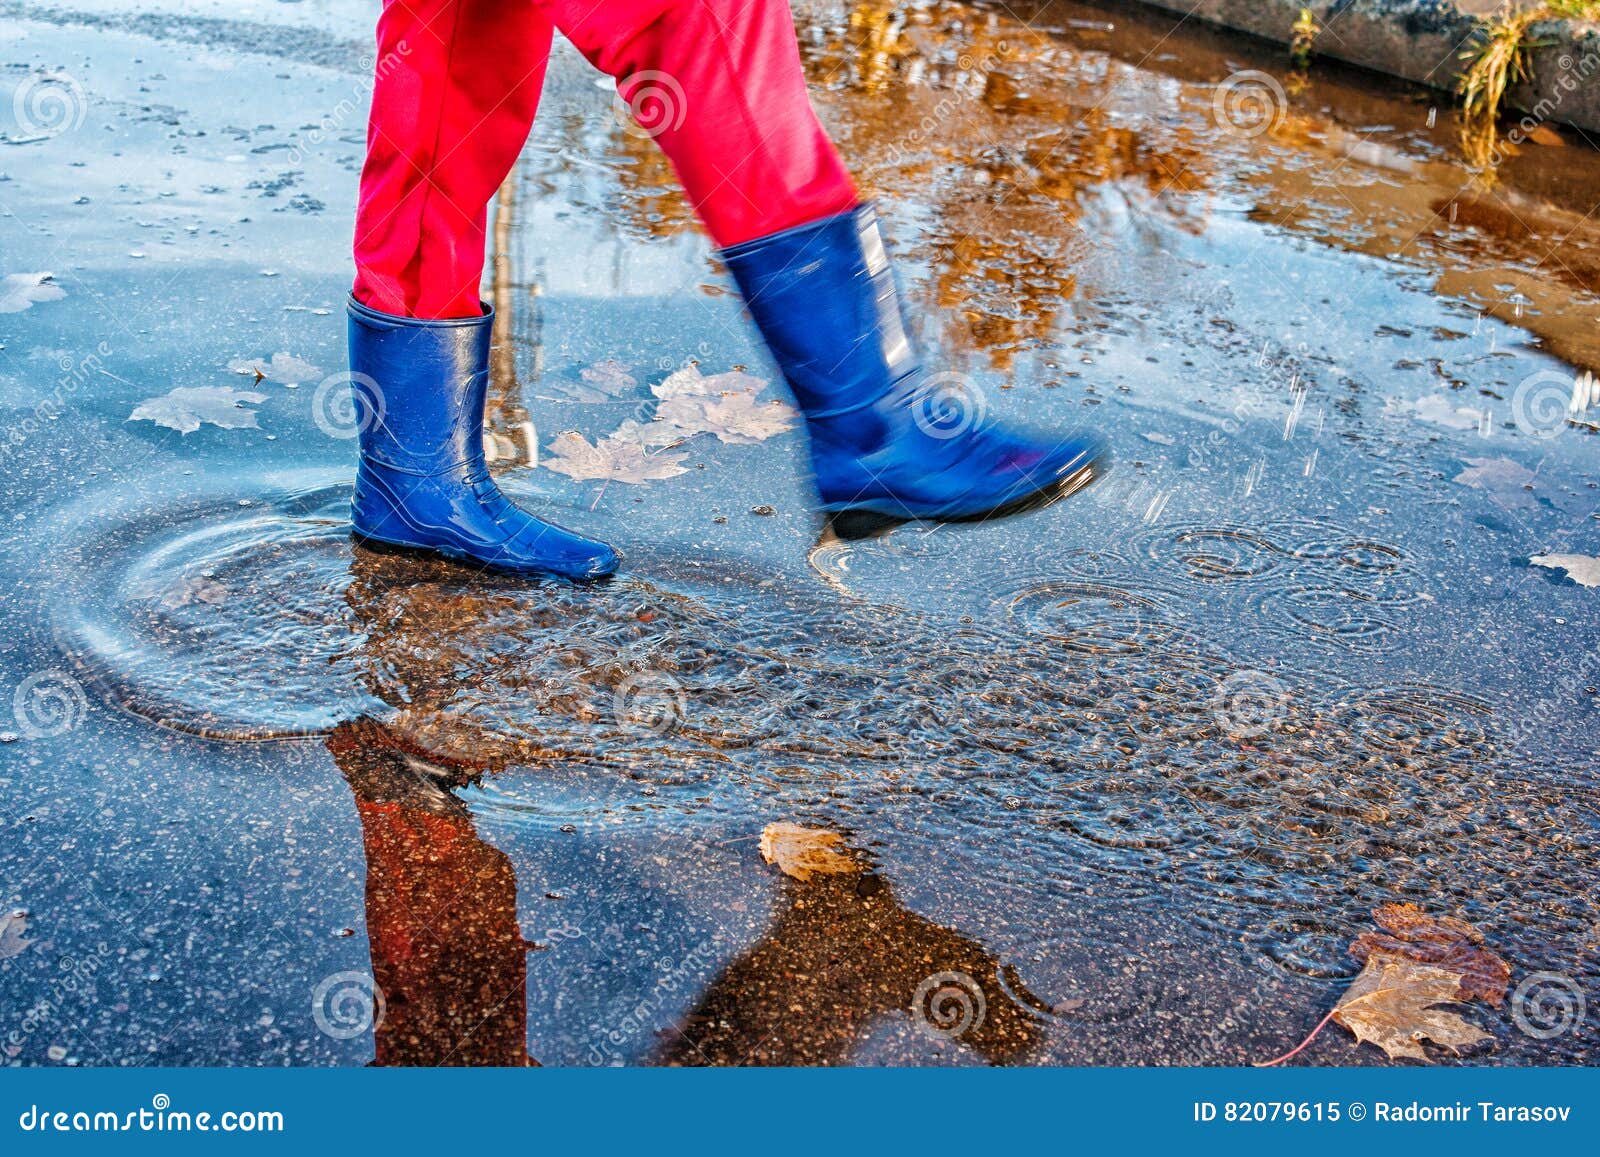 Girl Standing in a Puddle of Water Splashes Stock Image - Image of park ...